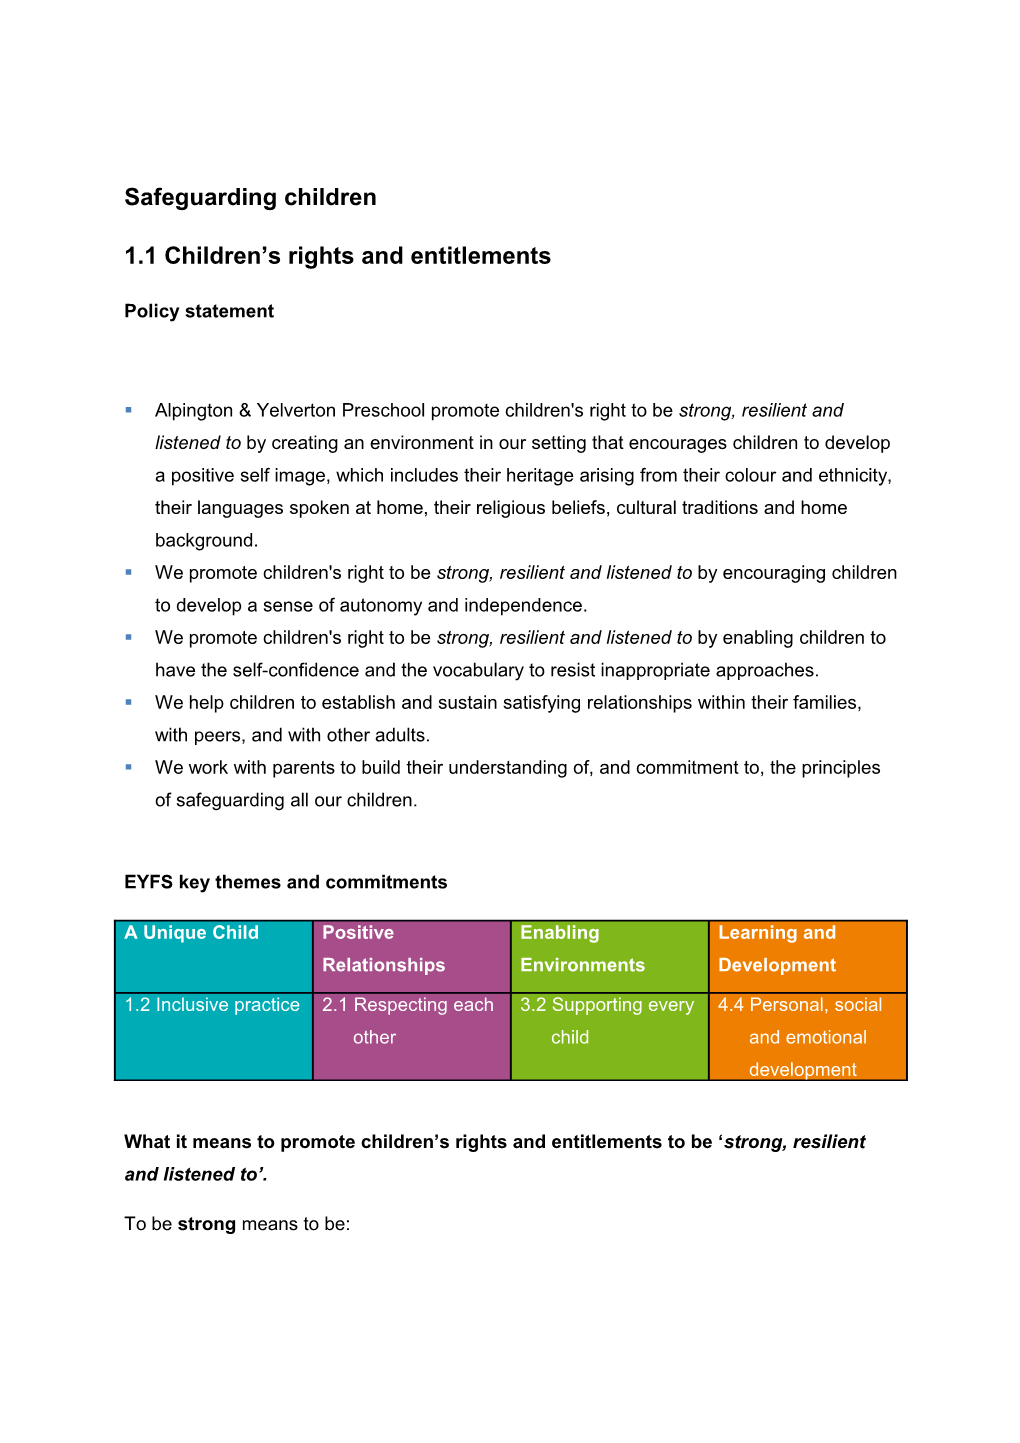 1.1 Children S Rights and Entitlements